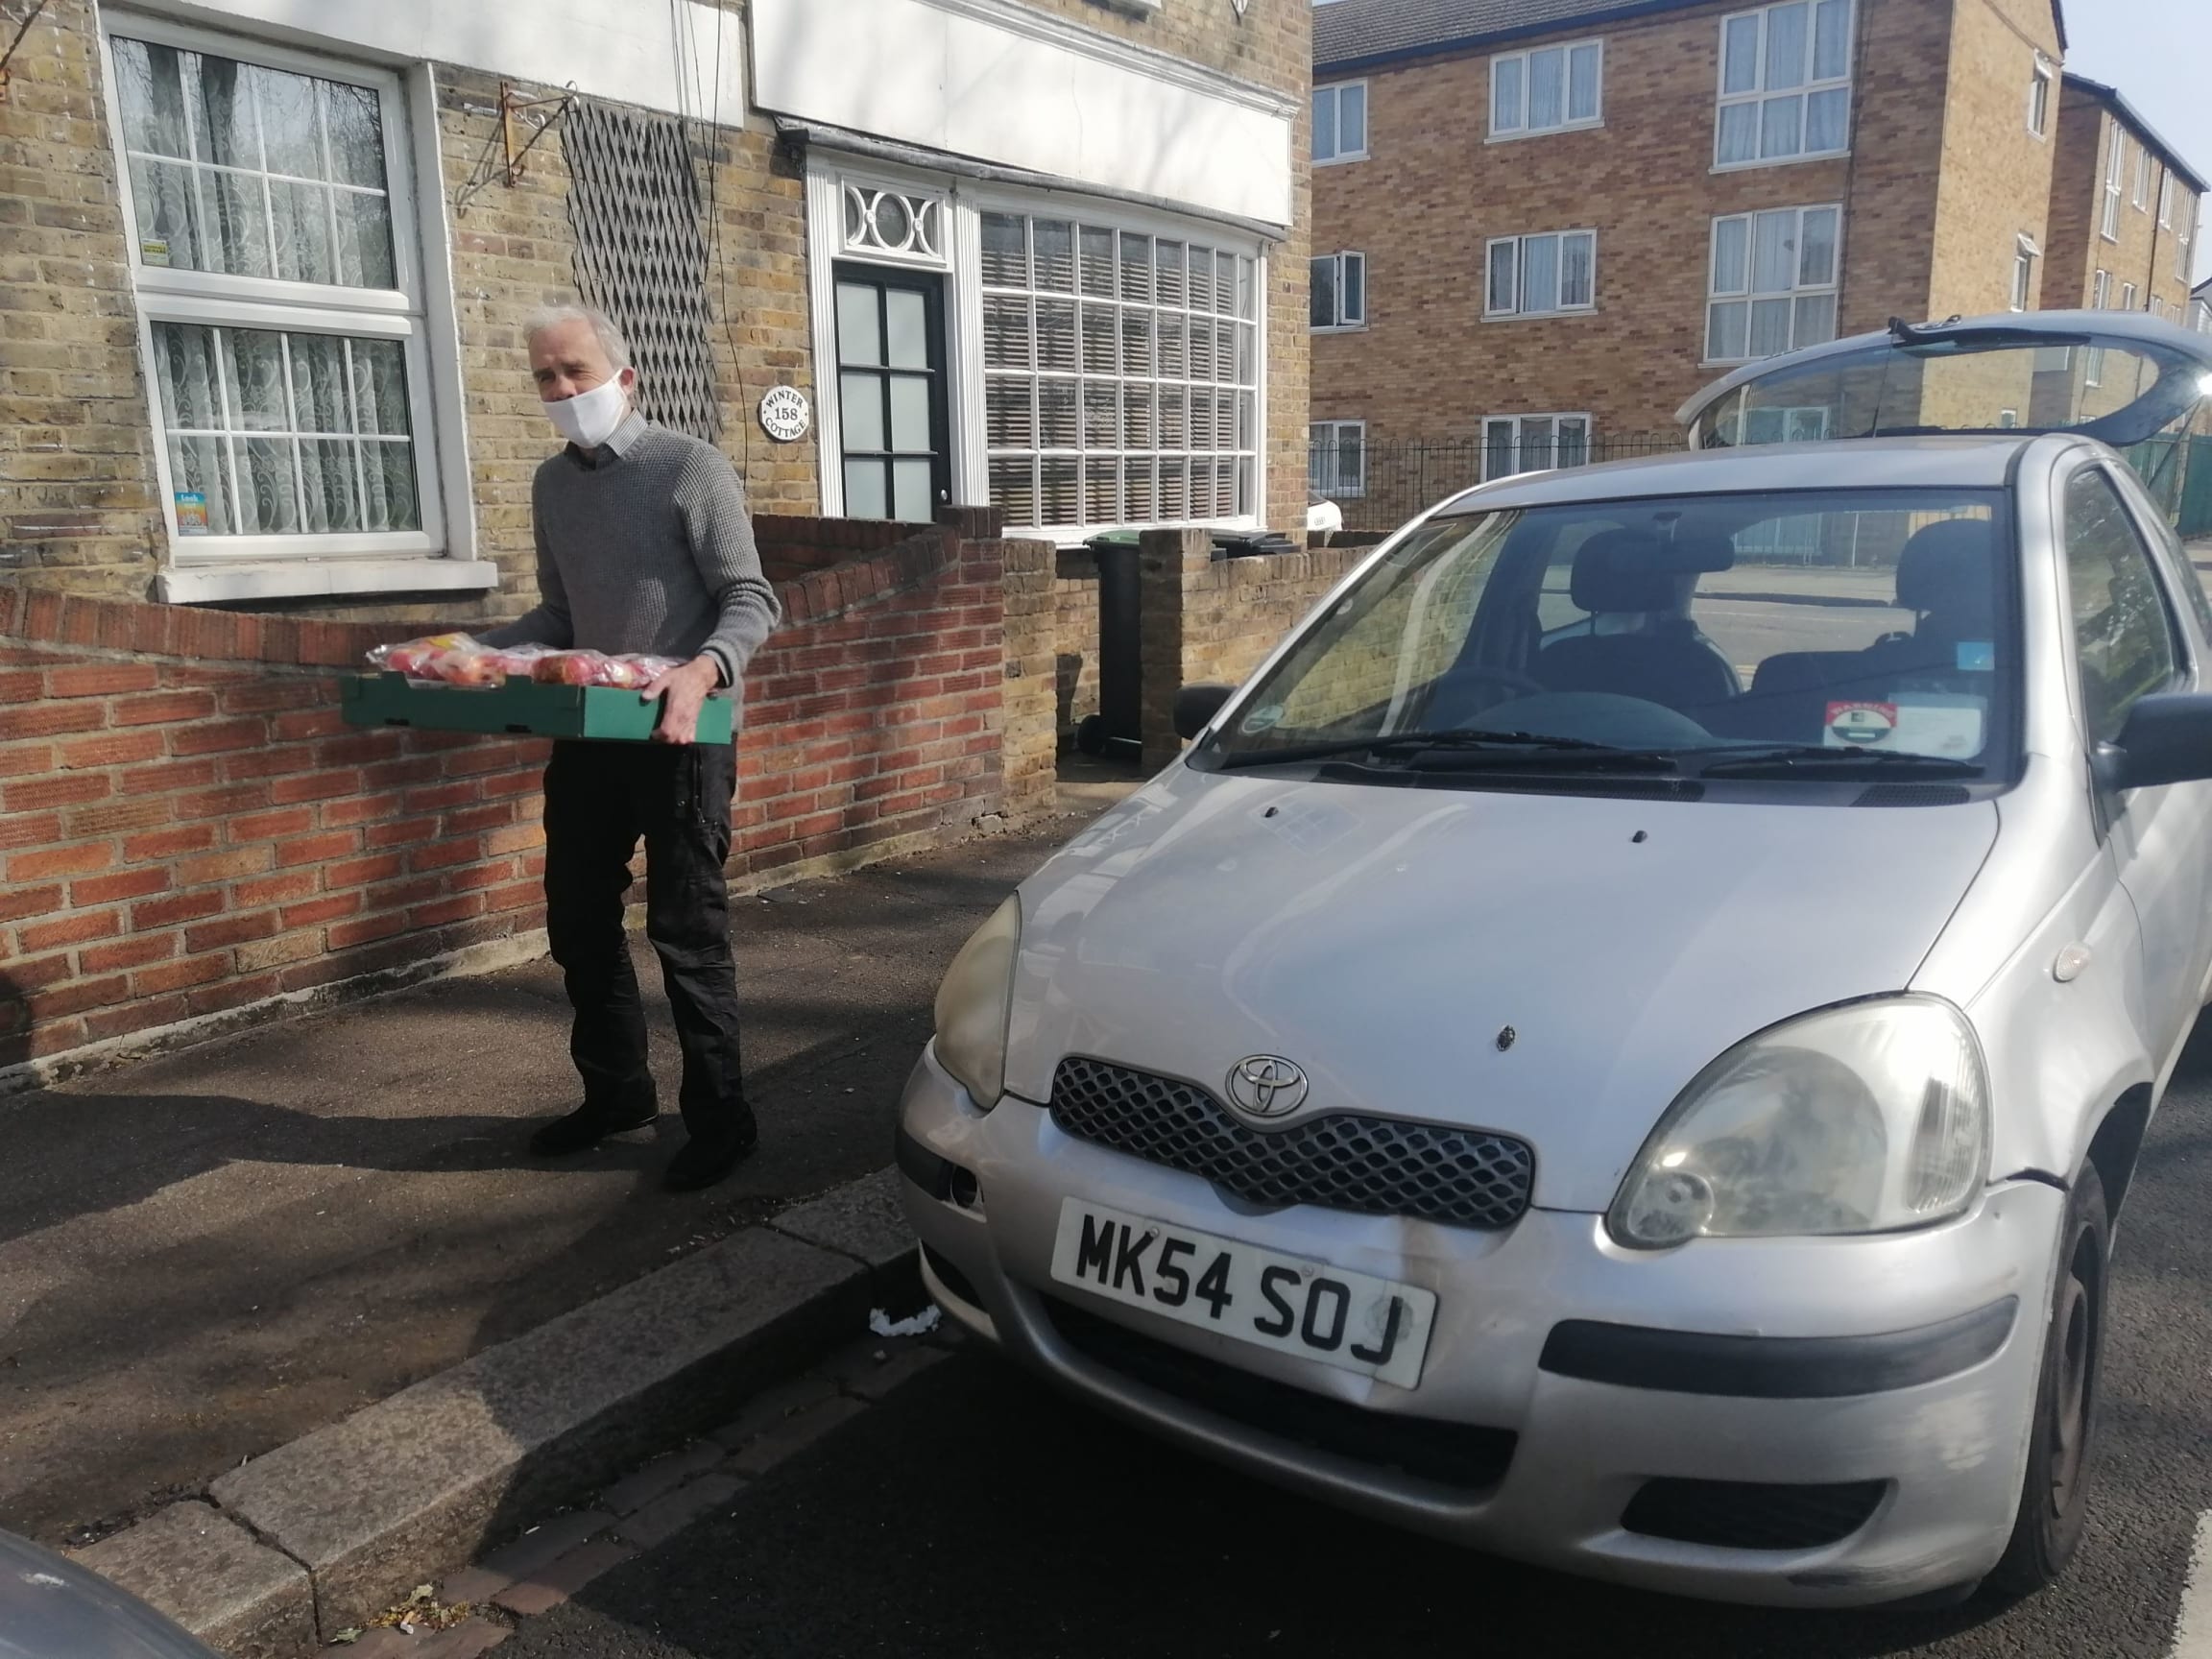 Volunteer taking food delivery from car and delivering to a vulnerable person